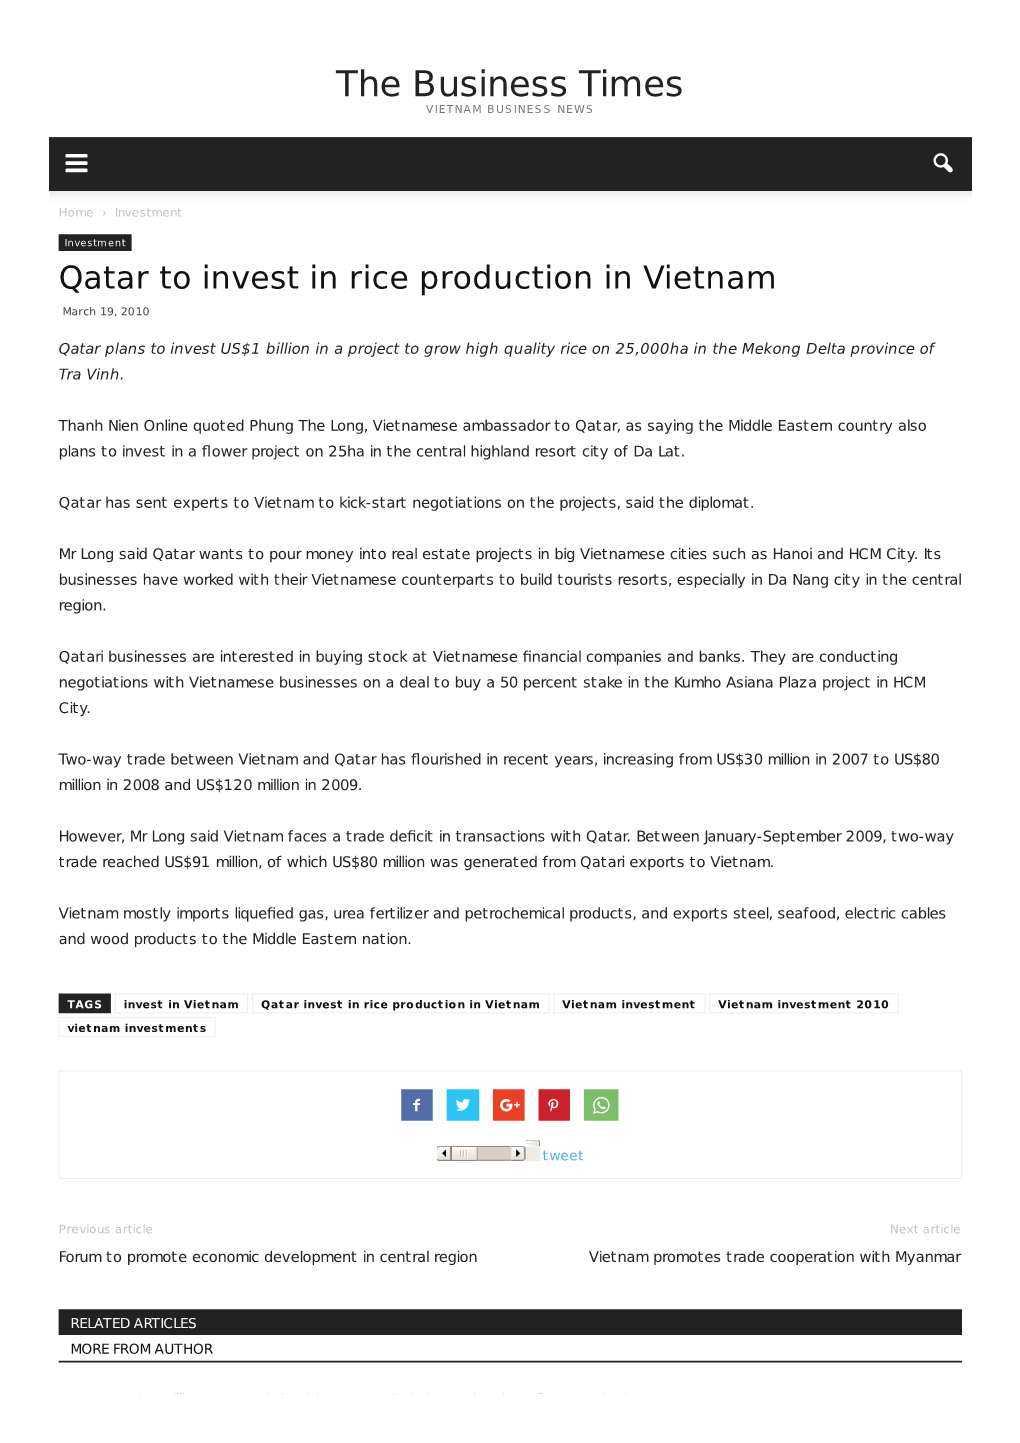 Qatar to Invest in Rice Production in Vietnam